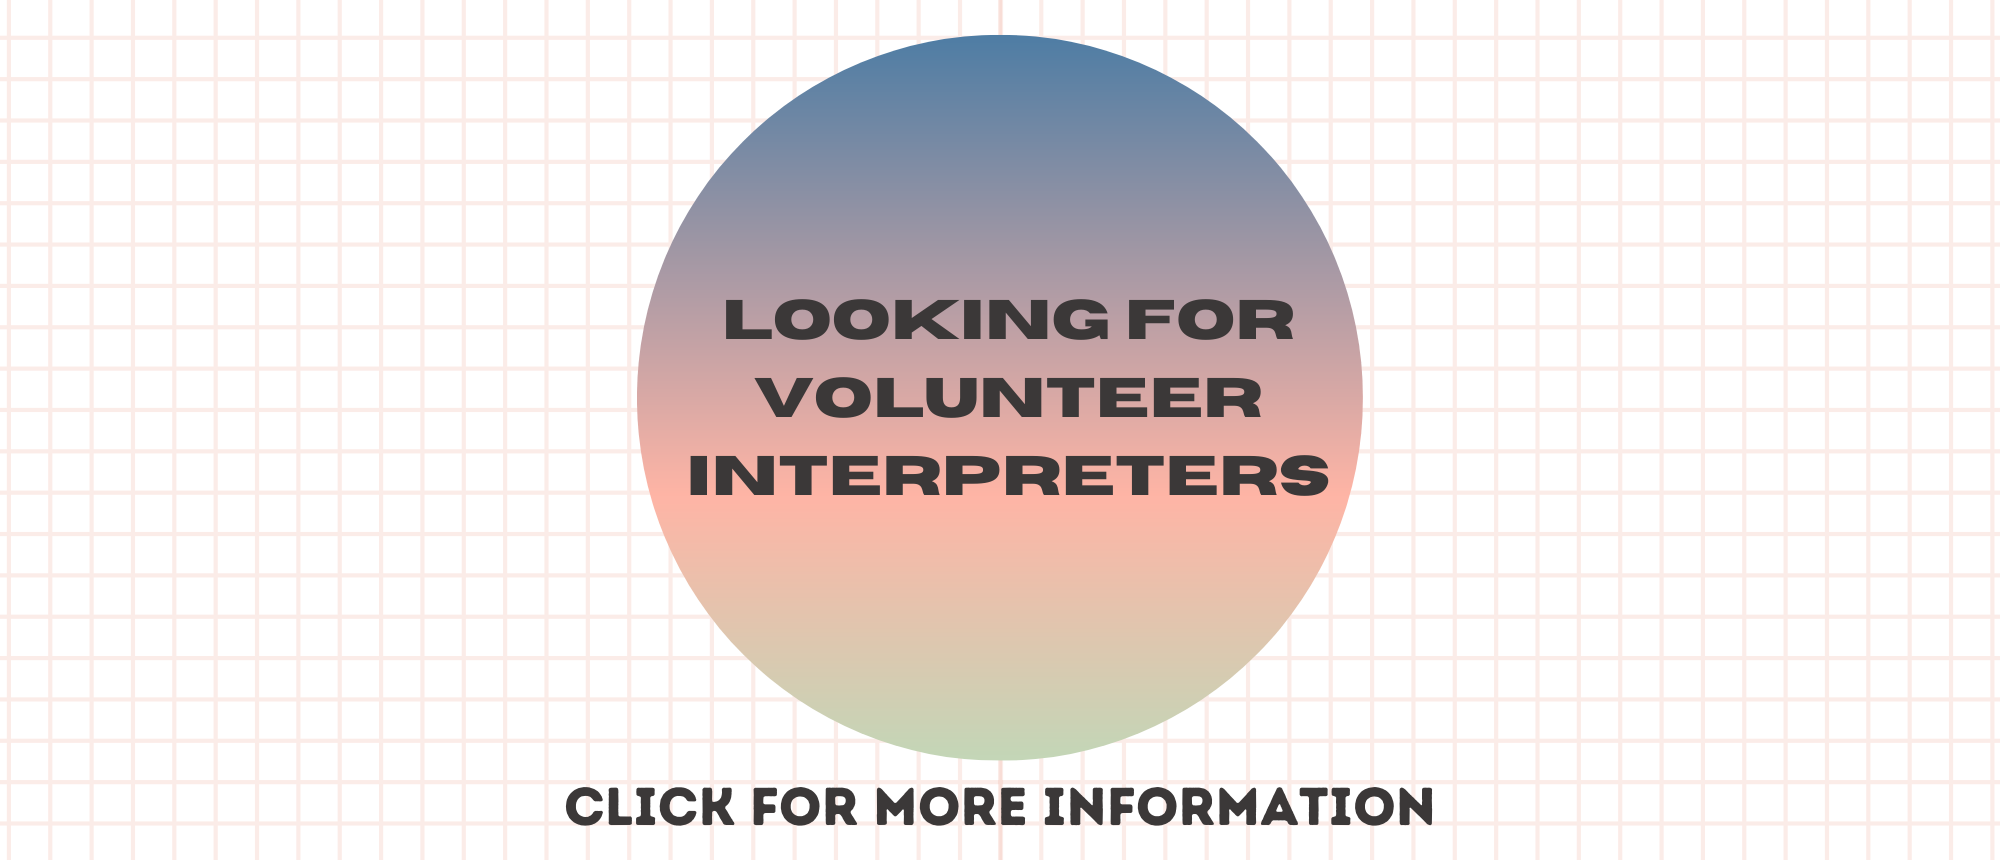 A gridded background with light pink lines. In the center is a gradient circle with blue, pink and green. It says "Looking for Volunteer Interpreters". Underneath the circle in black text "Click for more information"